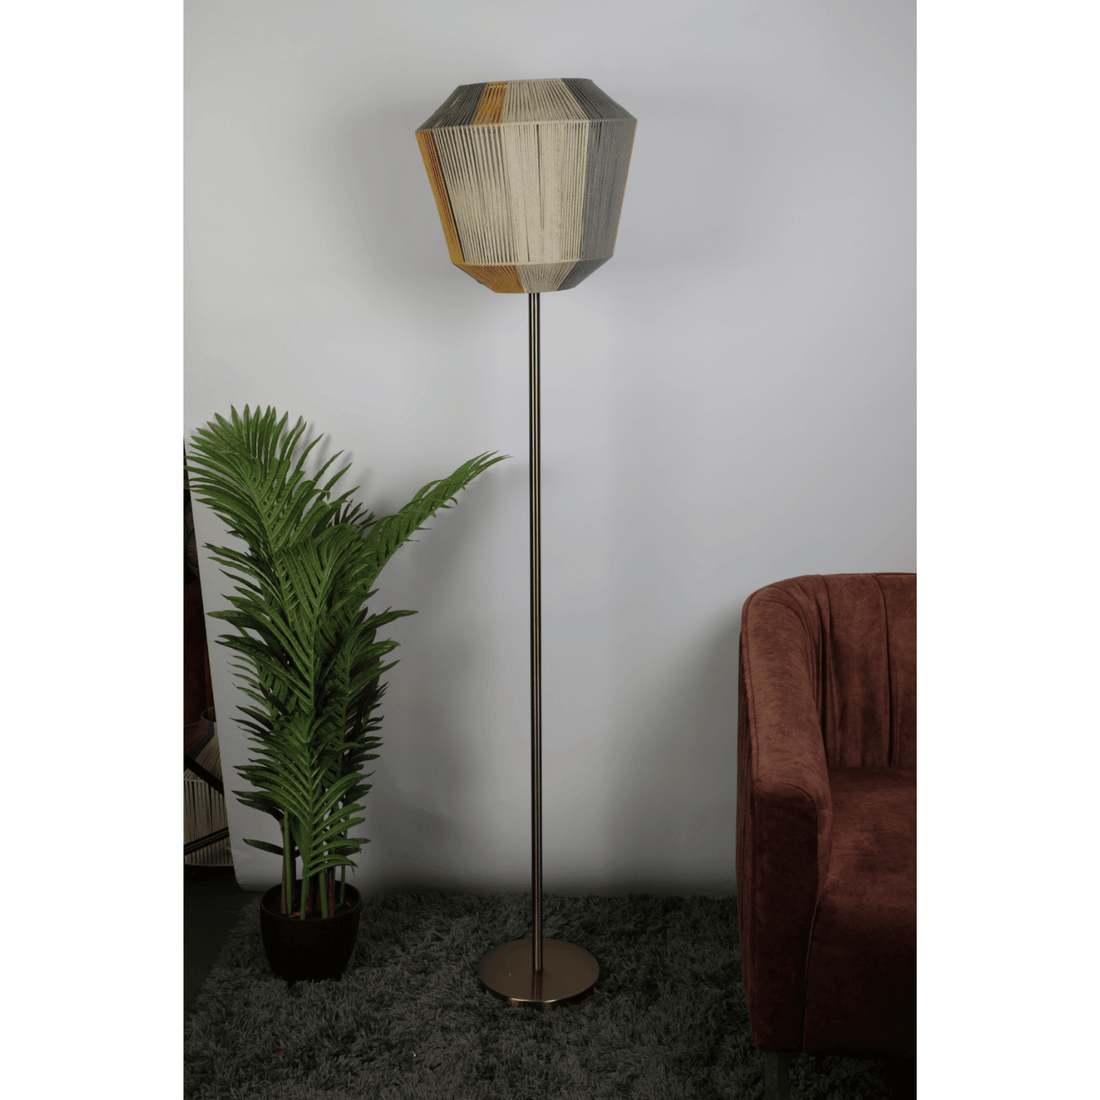 Velocee Handcrafted Floor Lamp by The Light Library